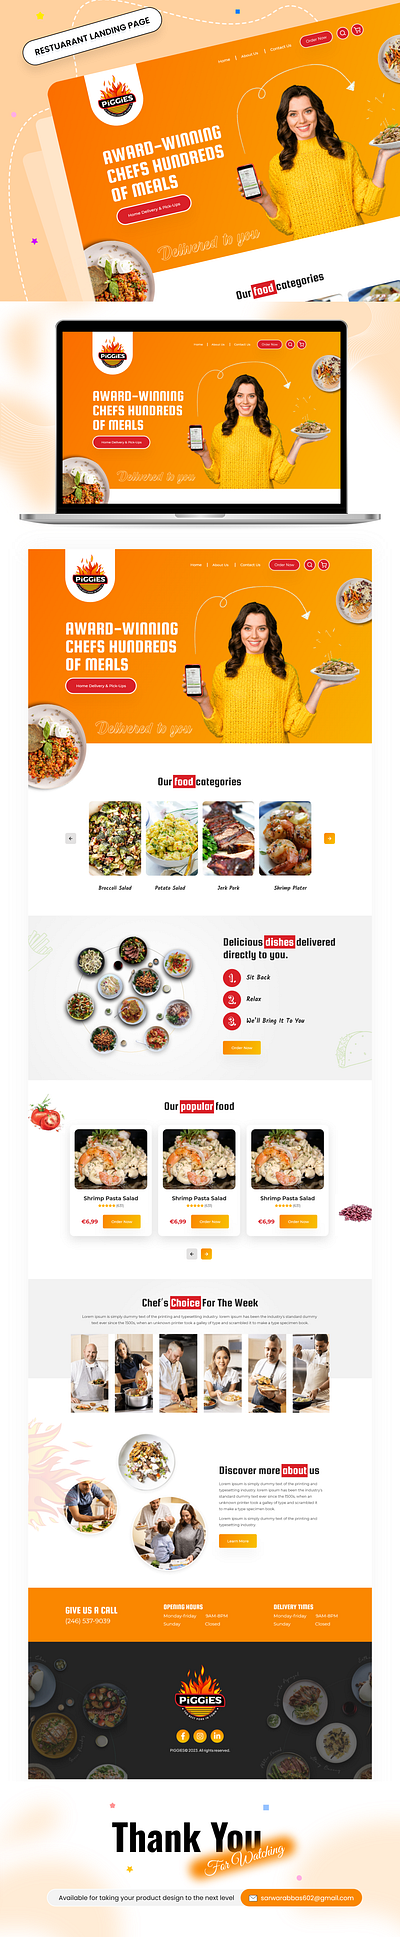 Restaurant landing page app chefs fffff food app food delivery food delivery app food delivery landing page food lover food order food order landing page free graphic design online delivery restaurant app restaurant landing page tasty foods tracking ui uiux web